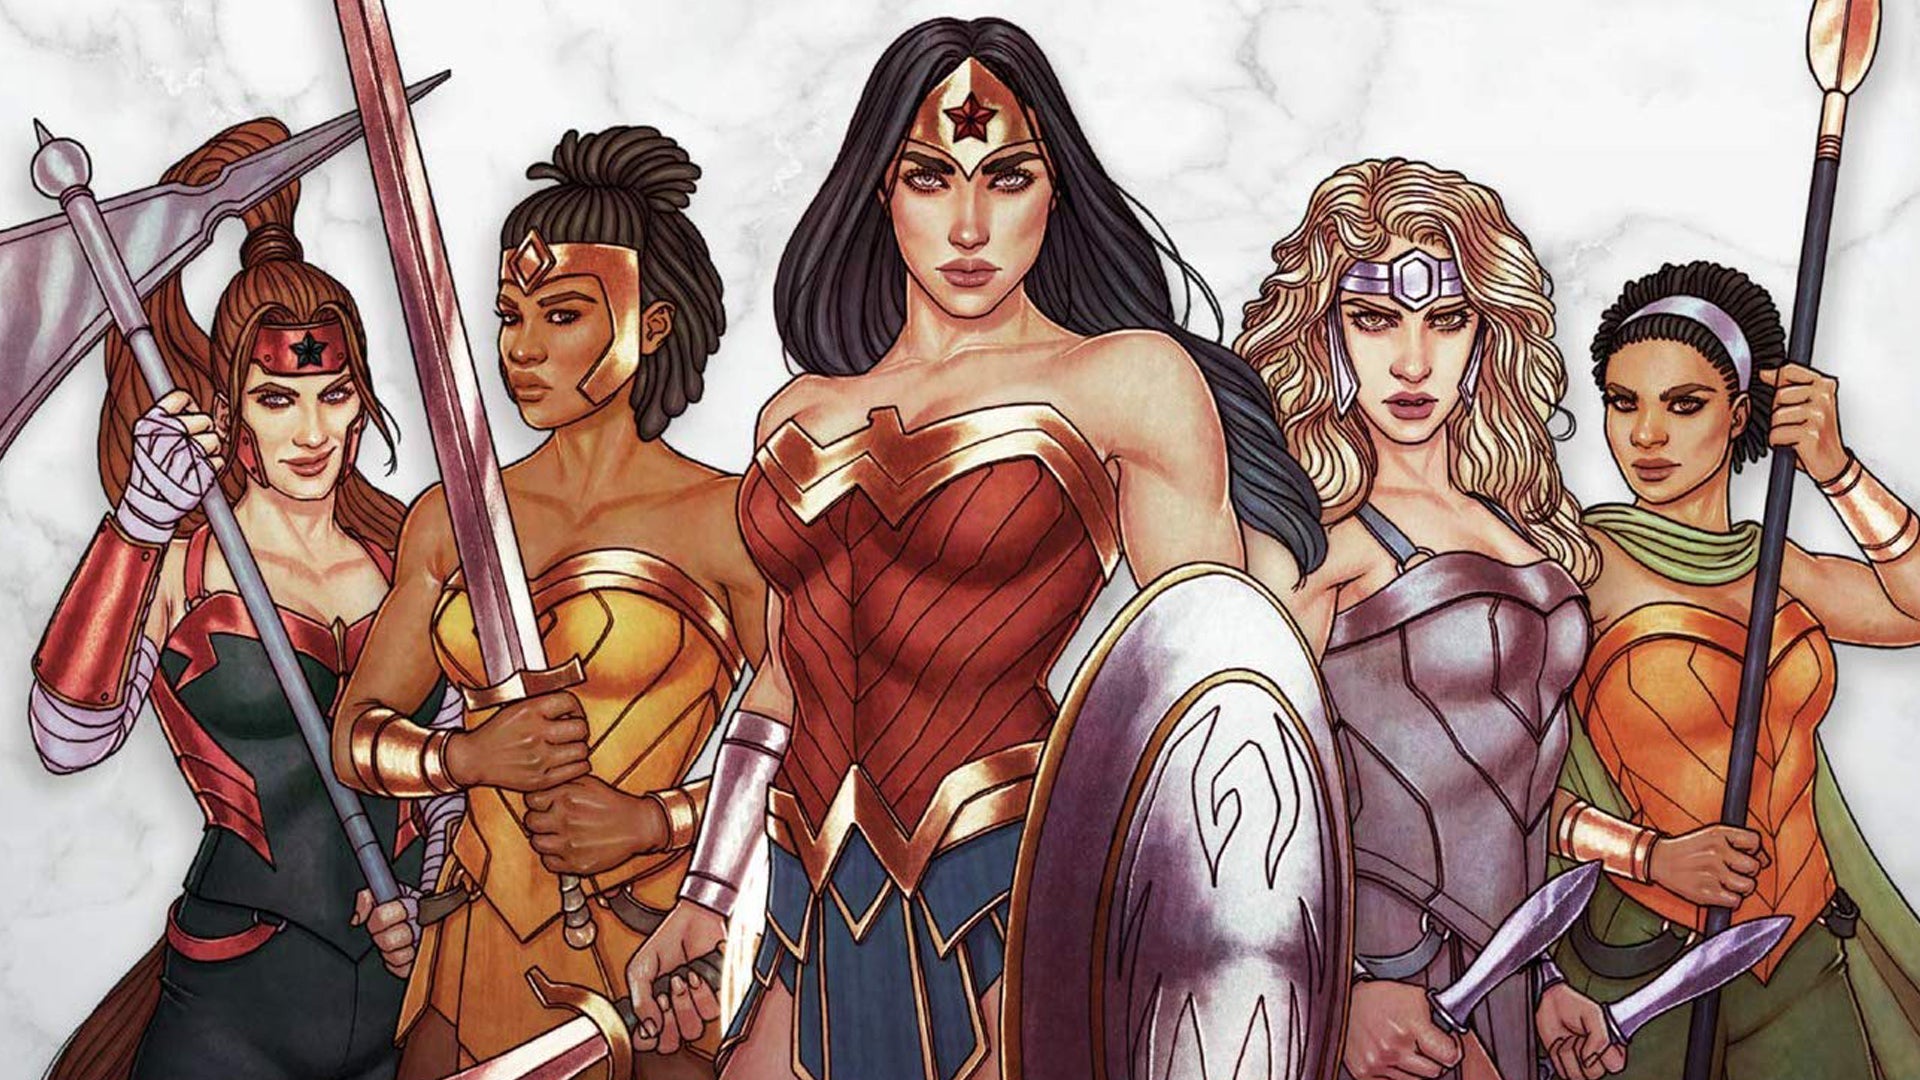 Image for Wonder Woman: Challenge of the Amazons